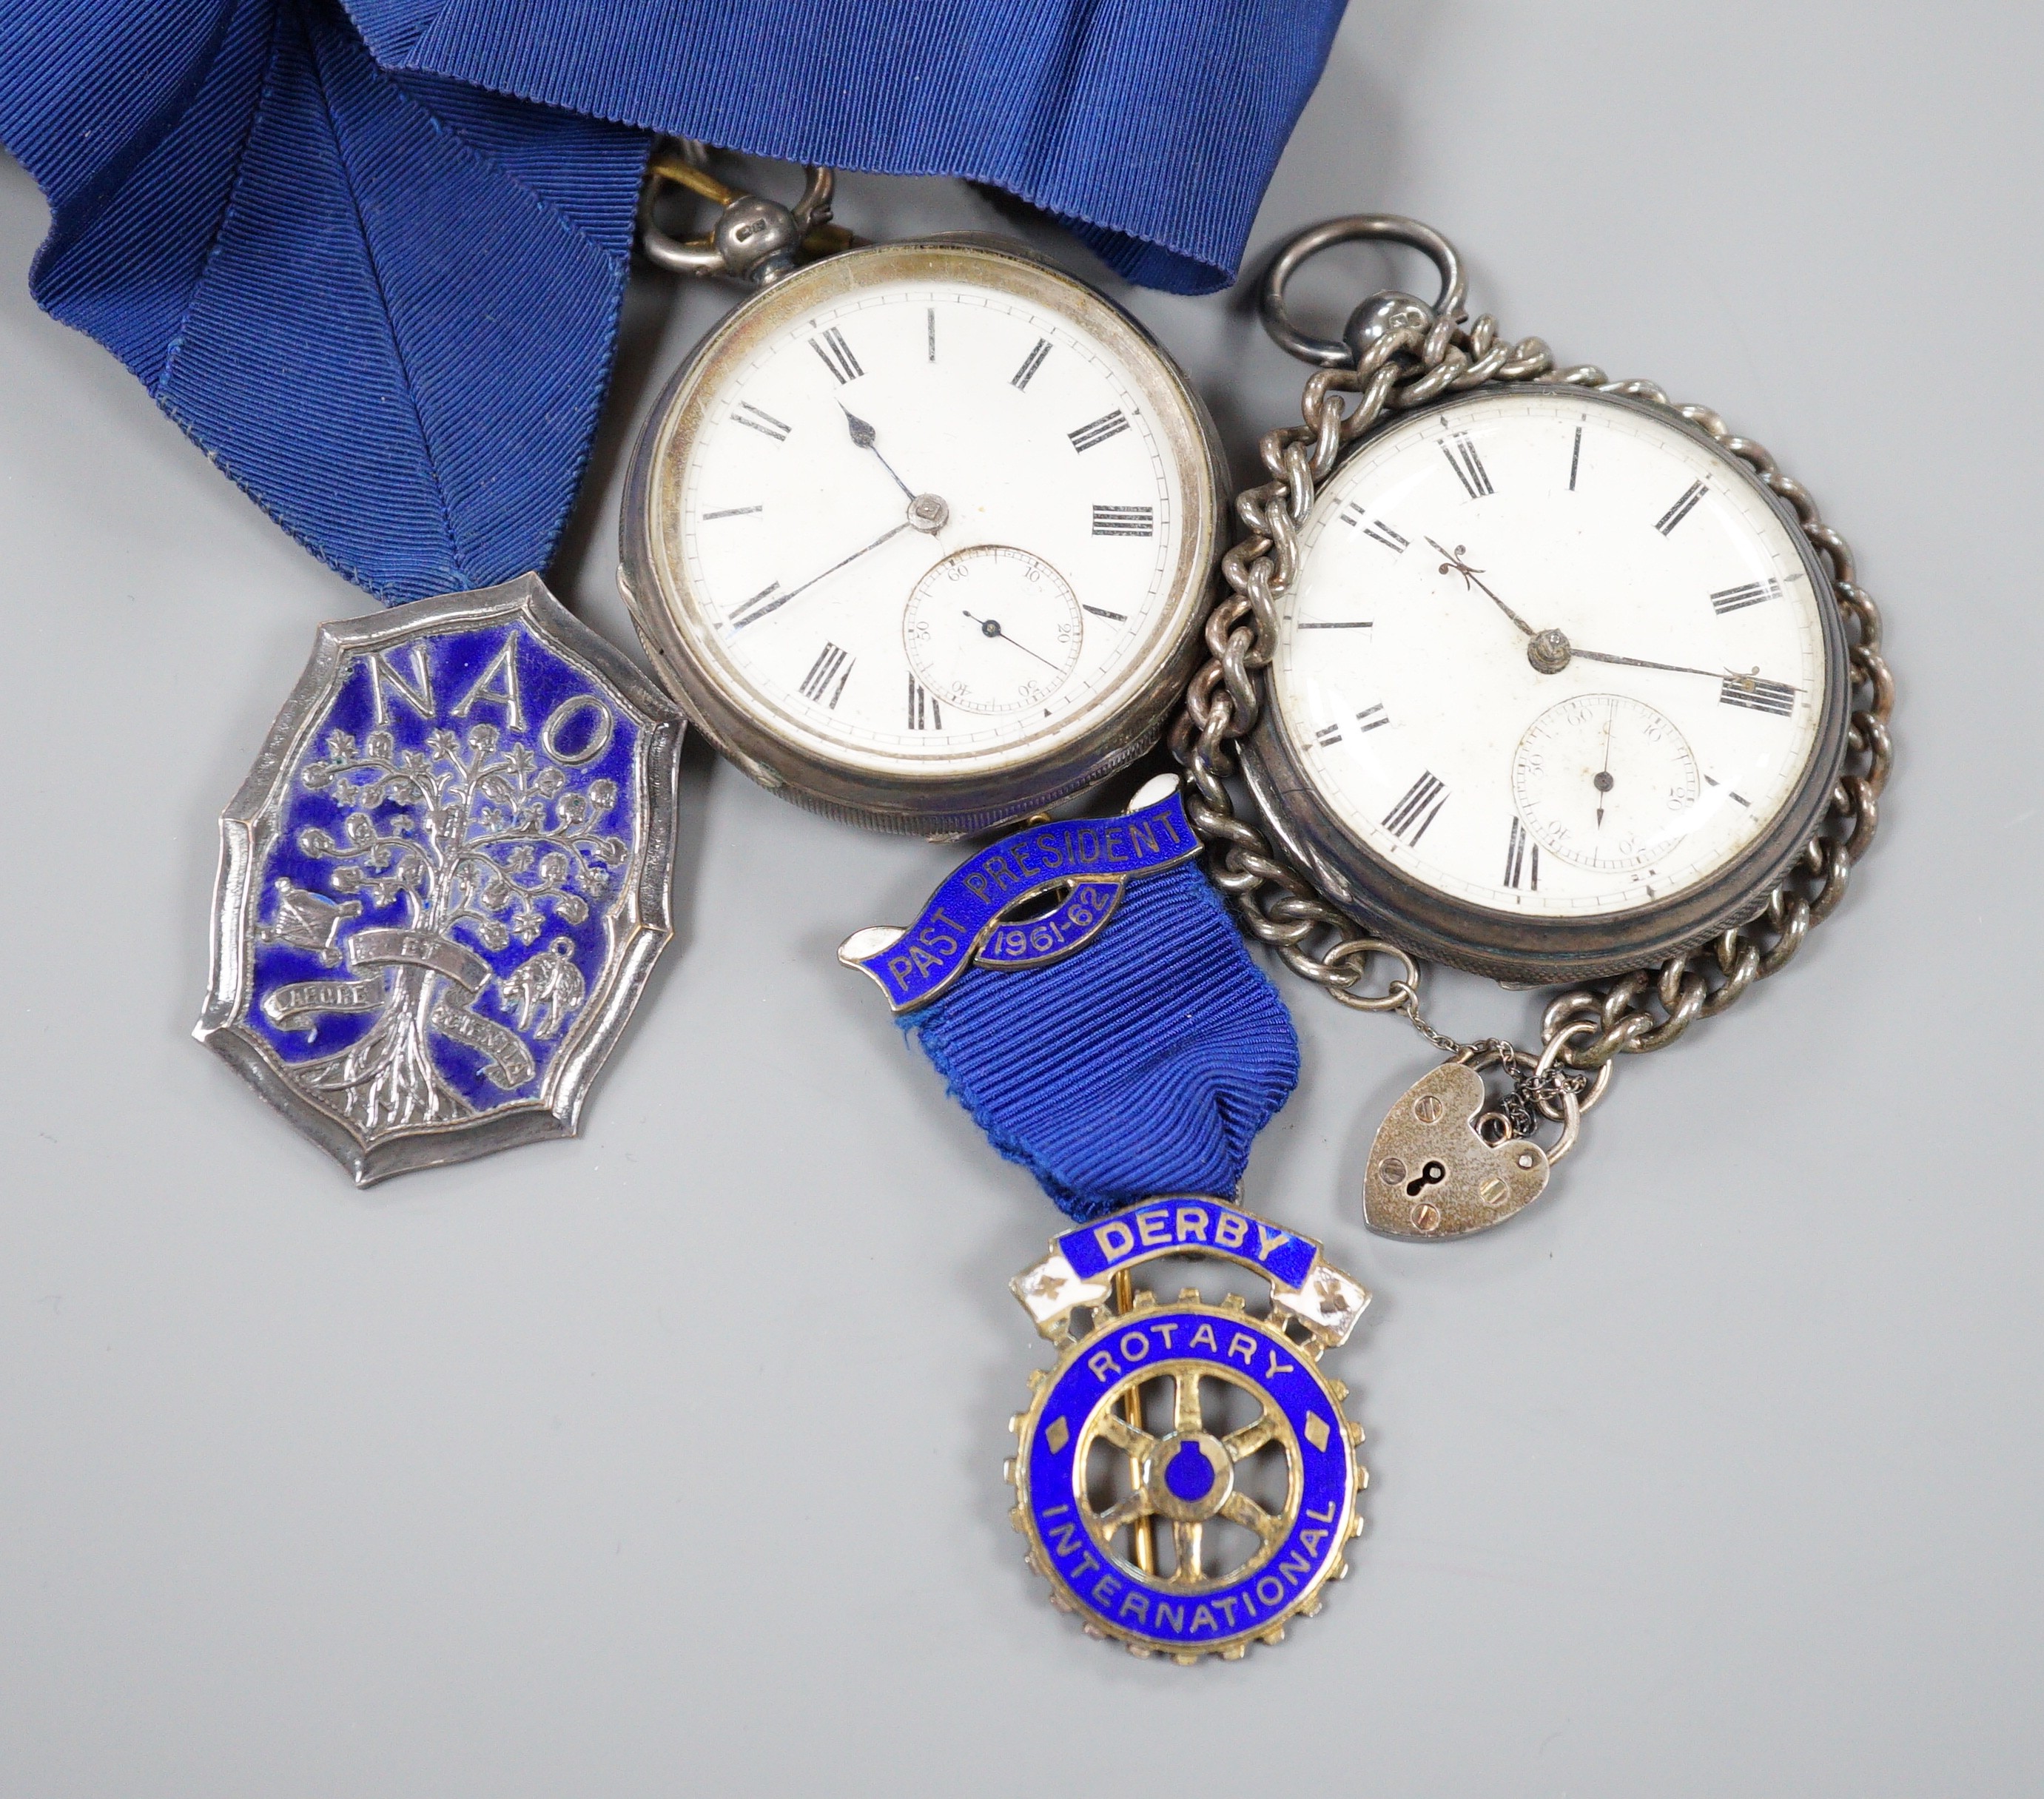 A small collection of silver badges and medals together with two silver pocket watches and a bracelet.